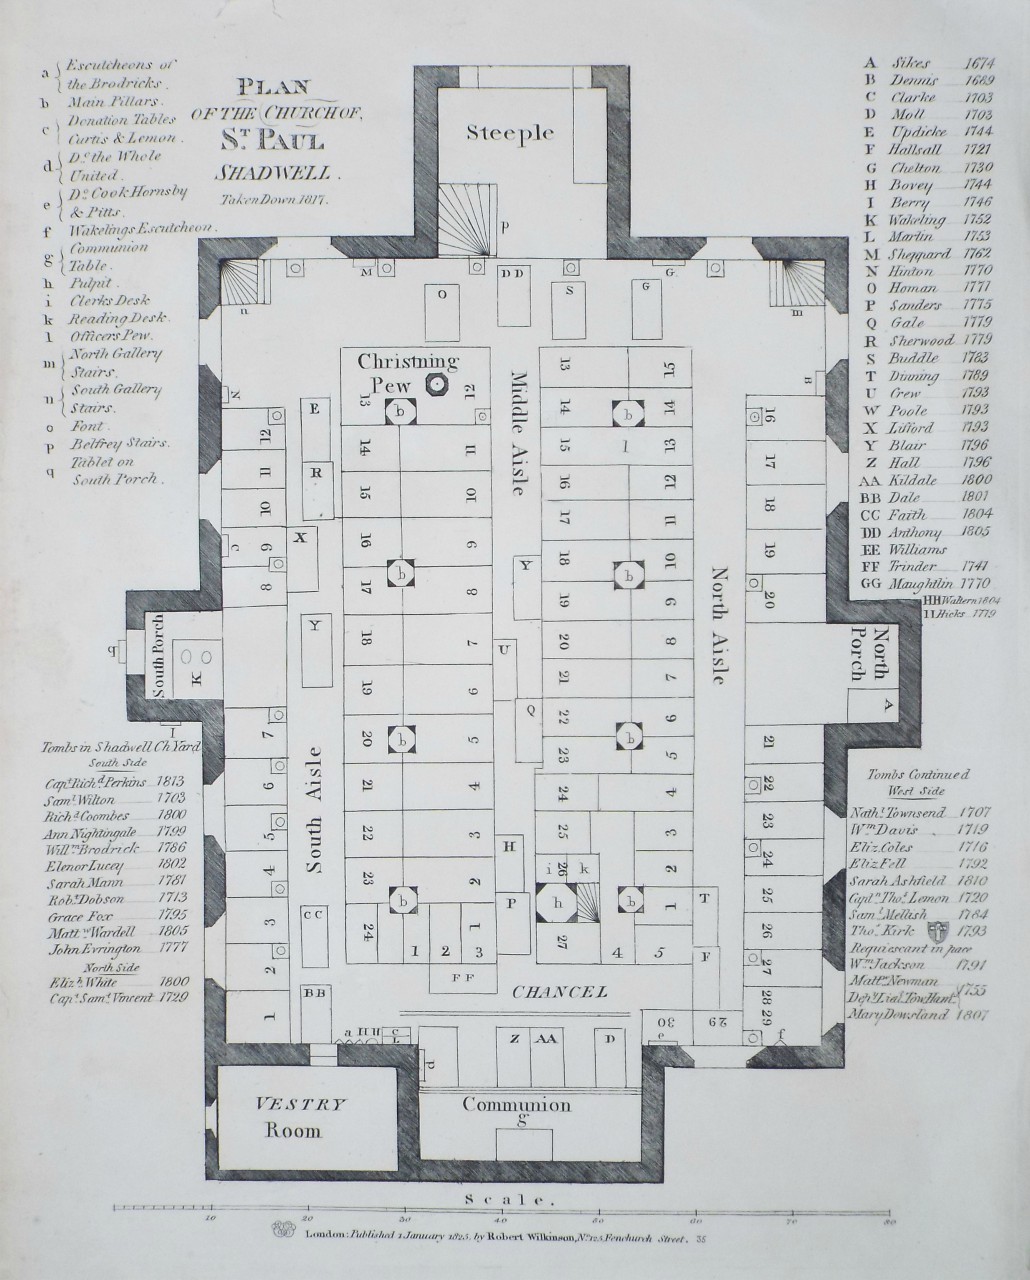 Print - Plan of the Church of St. Paul Shadwell, taken down 1817.